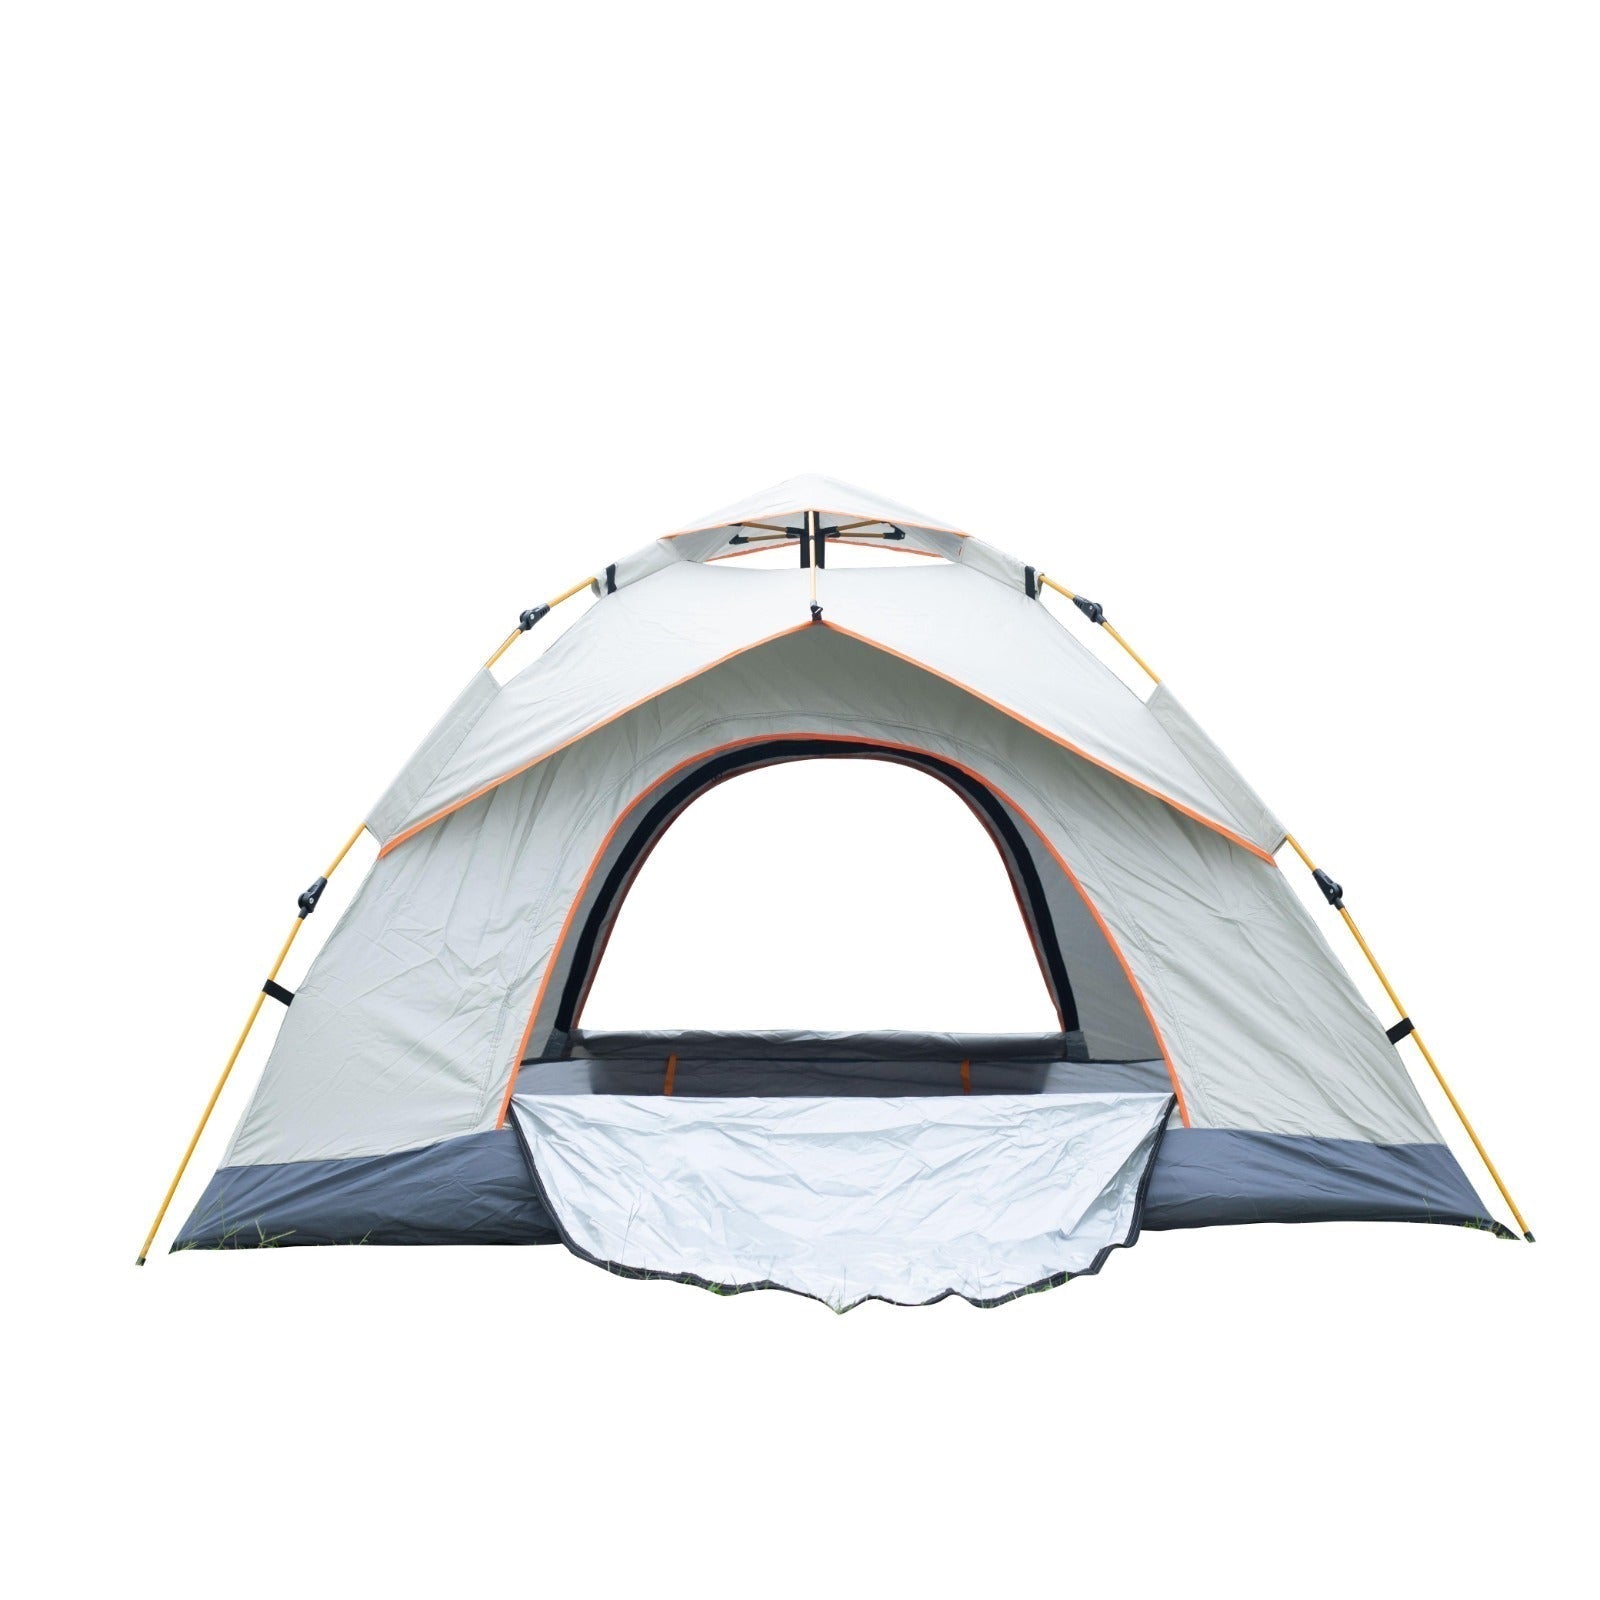 Green Lion Camping Tent 3-4 People GT-3 GL-T022 - Beige